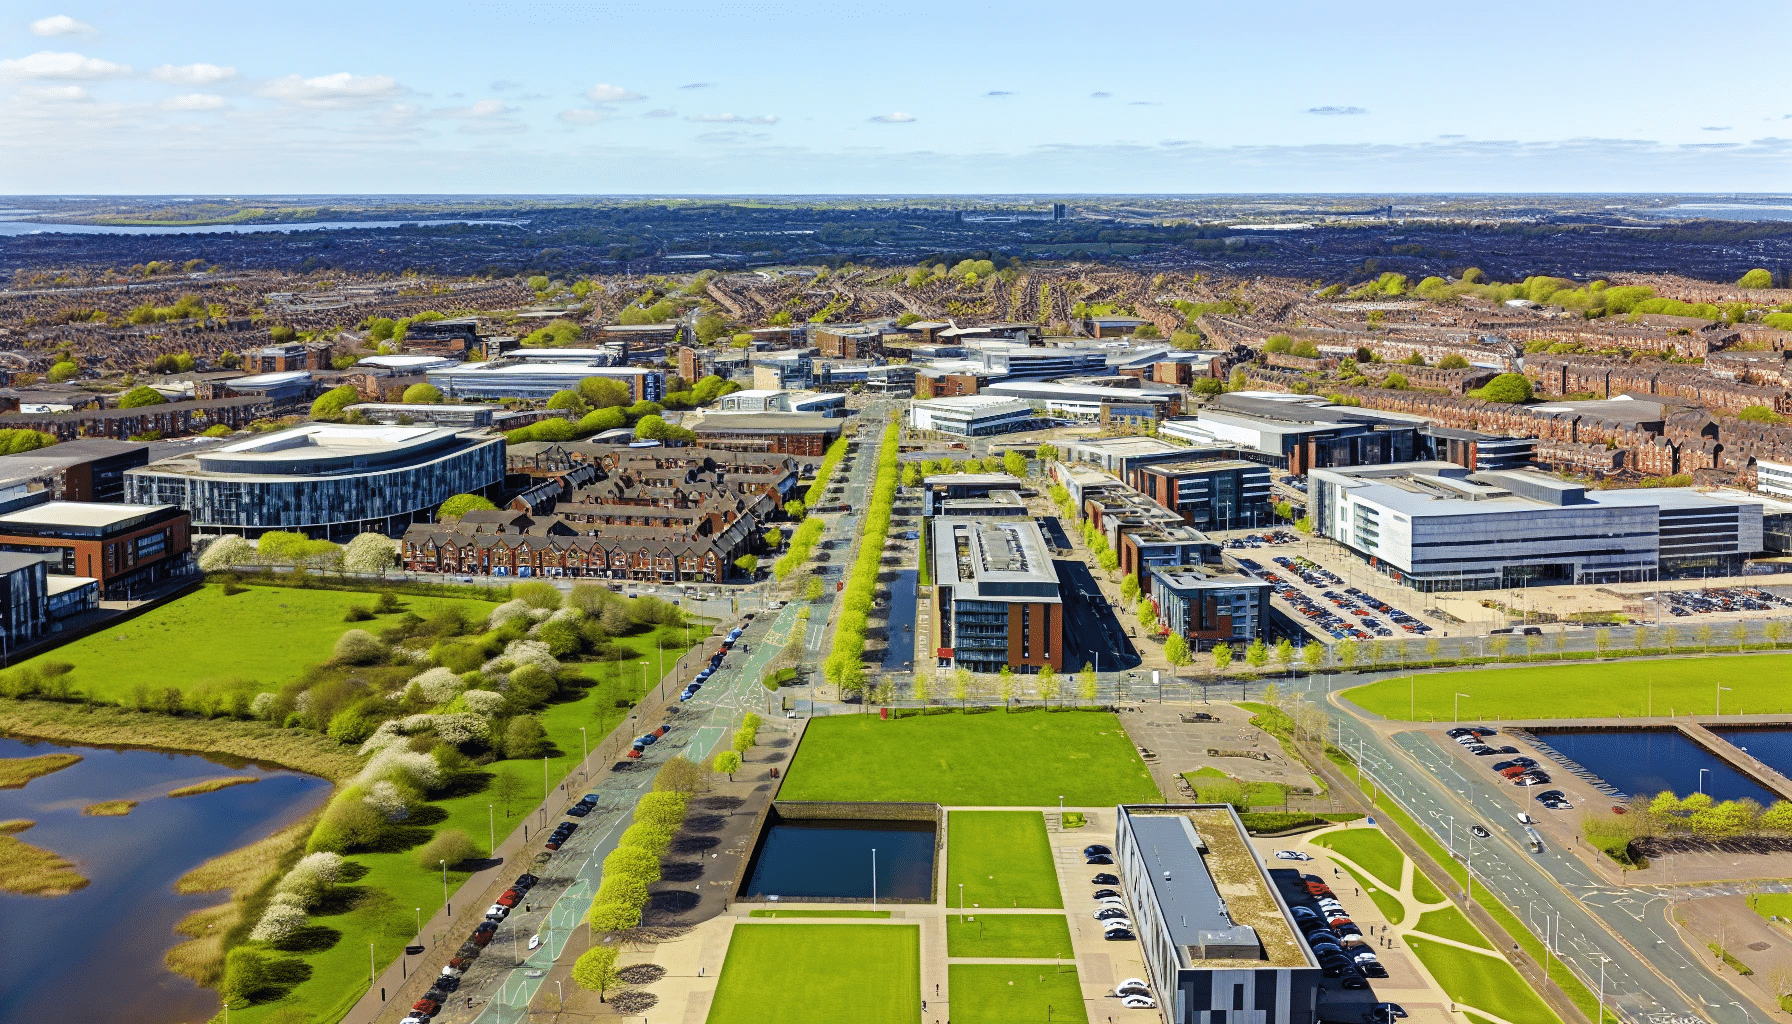 Aerial view of Wirral showing tech businesses and green spaces